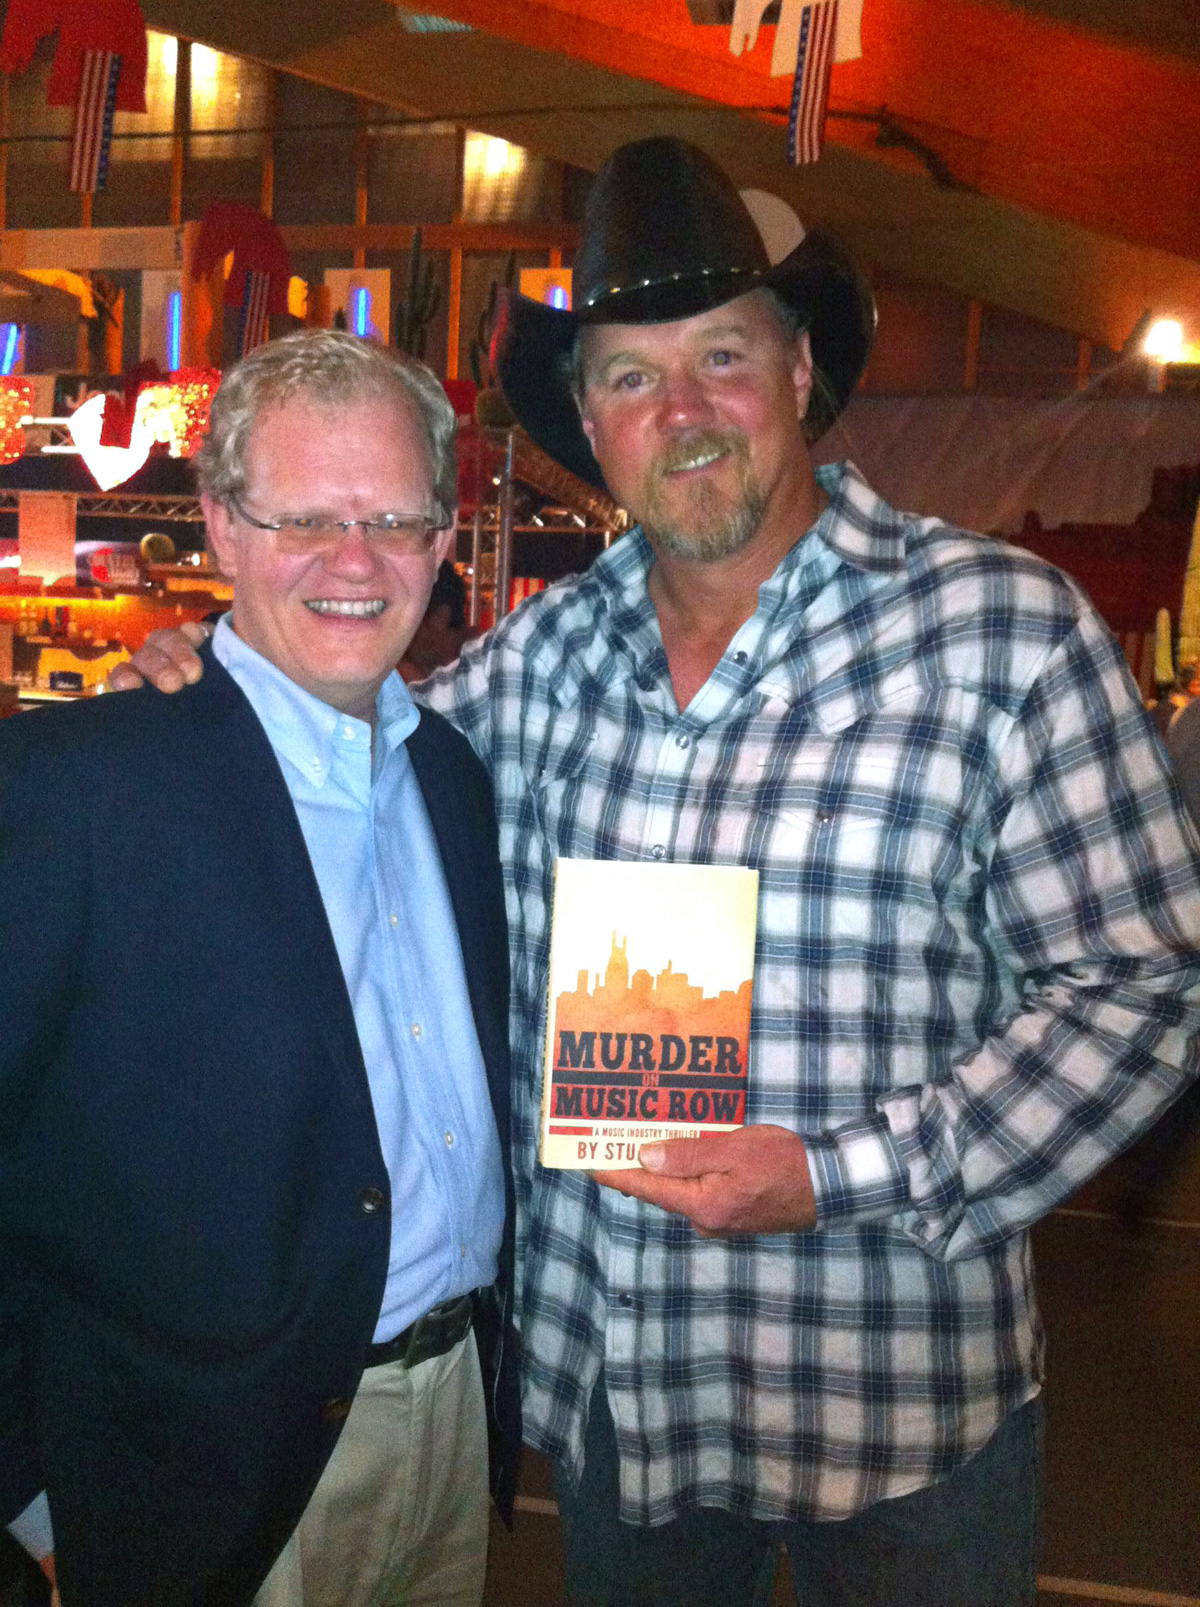 Stuart Dill gives a copy of his book to Trace Adkins